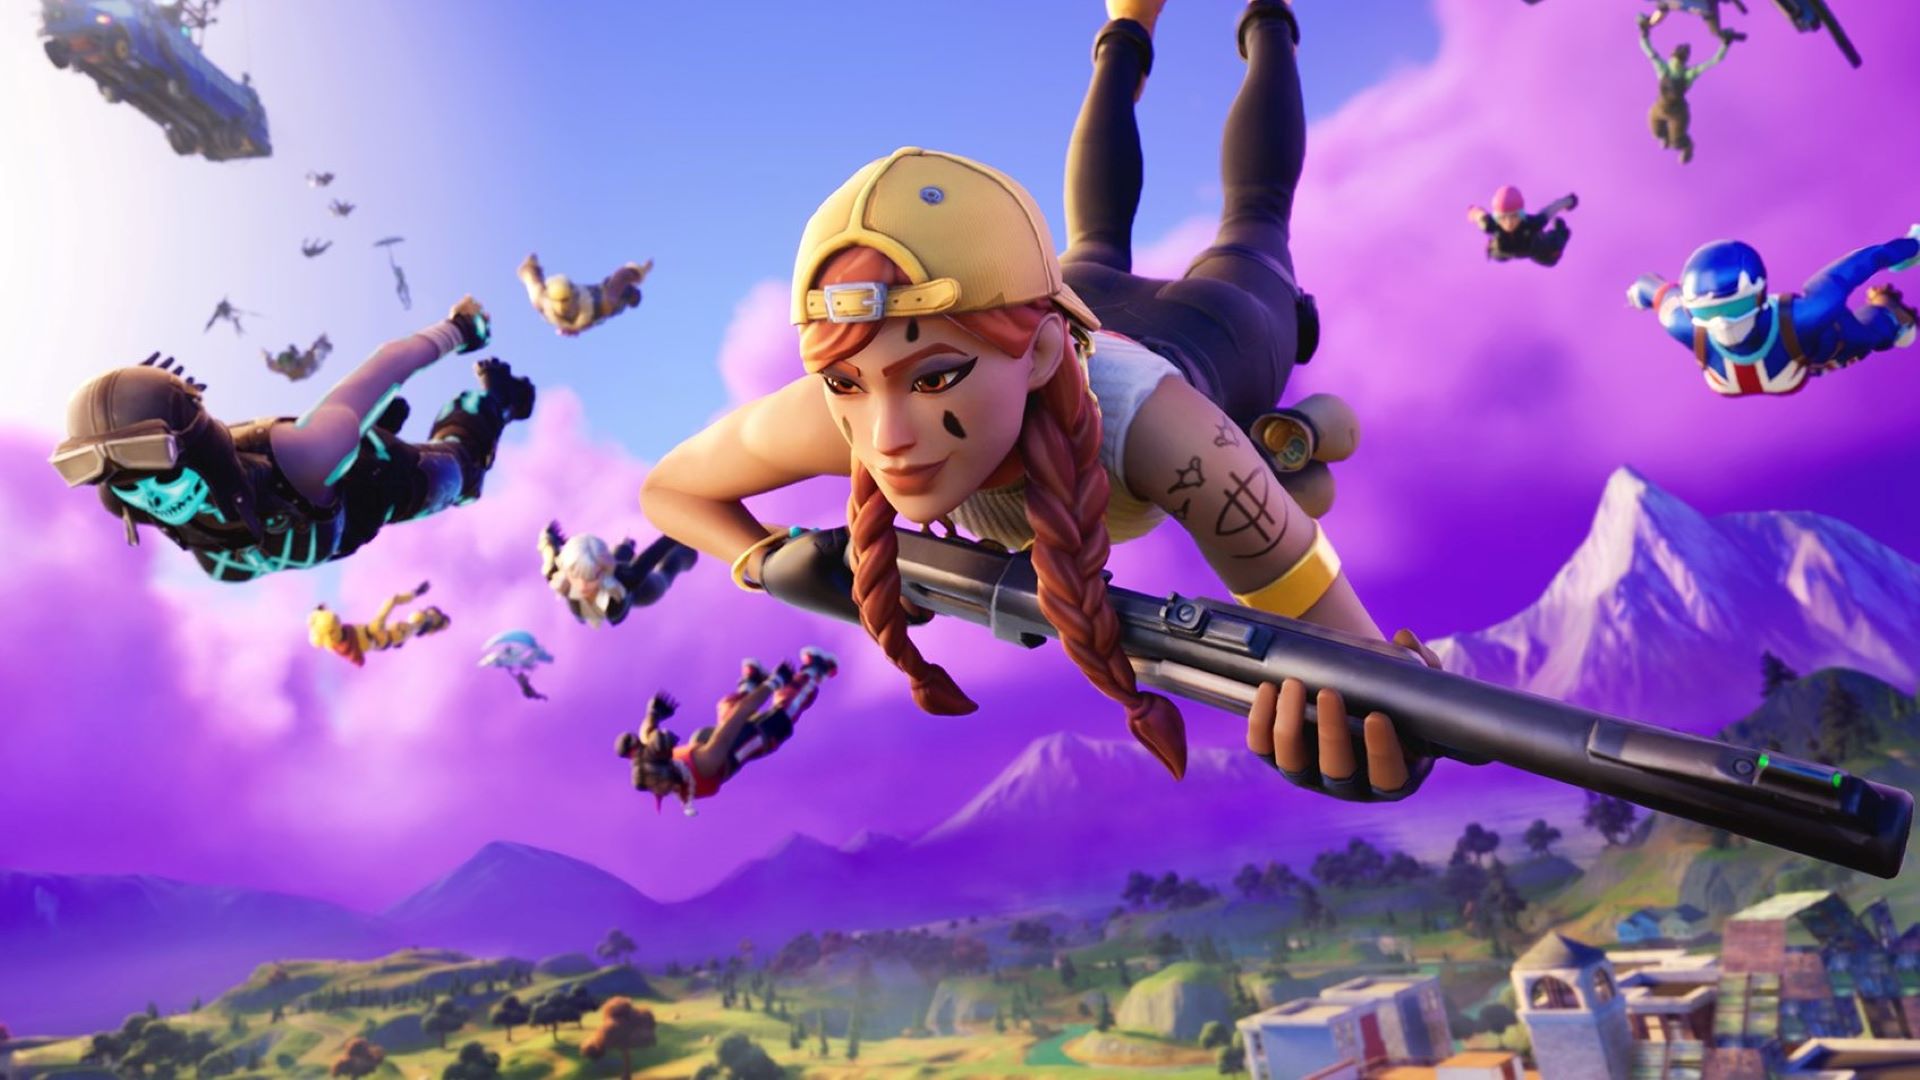 Fortnite mode Late Game Arena returns later this month